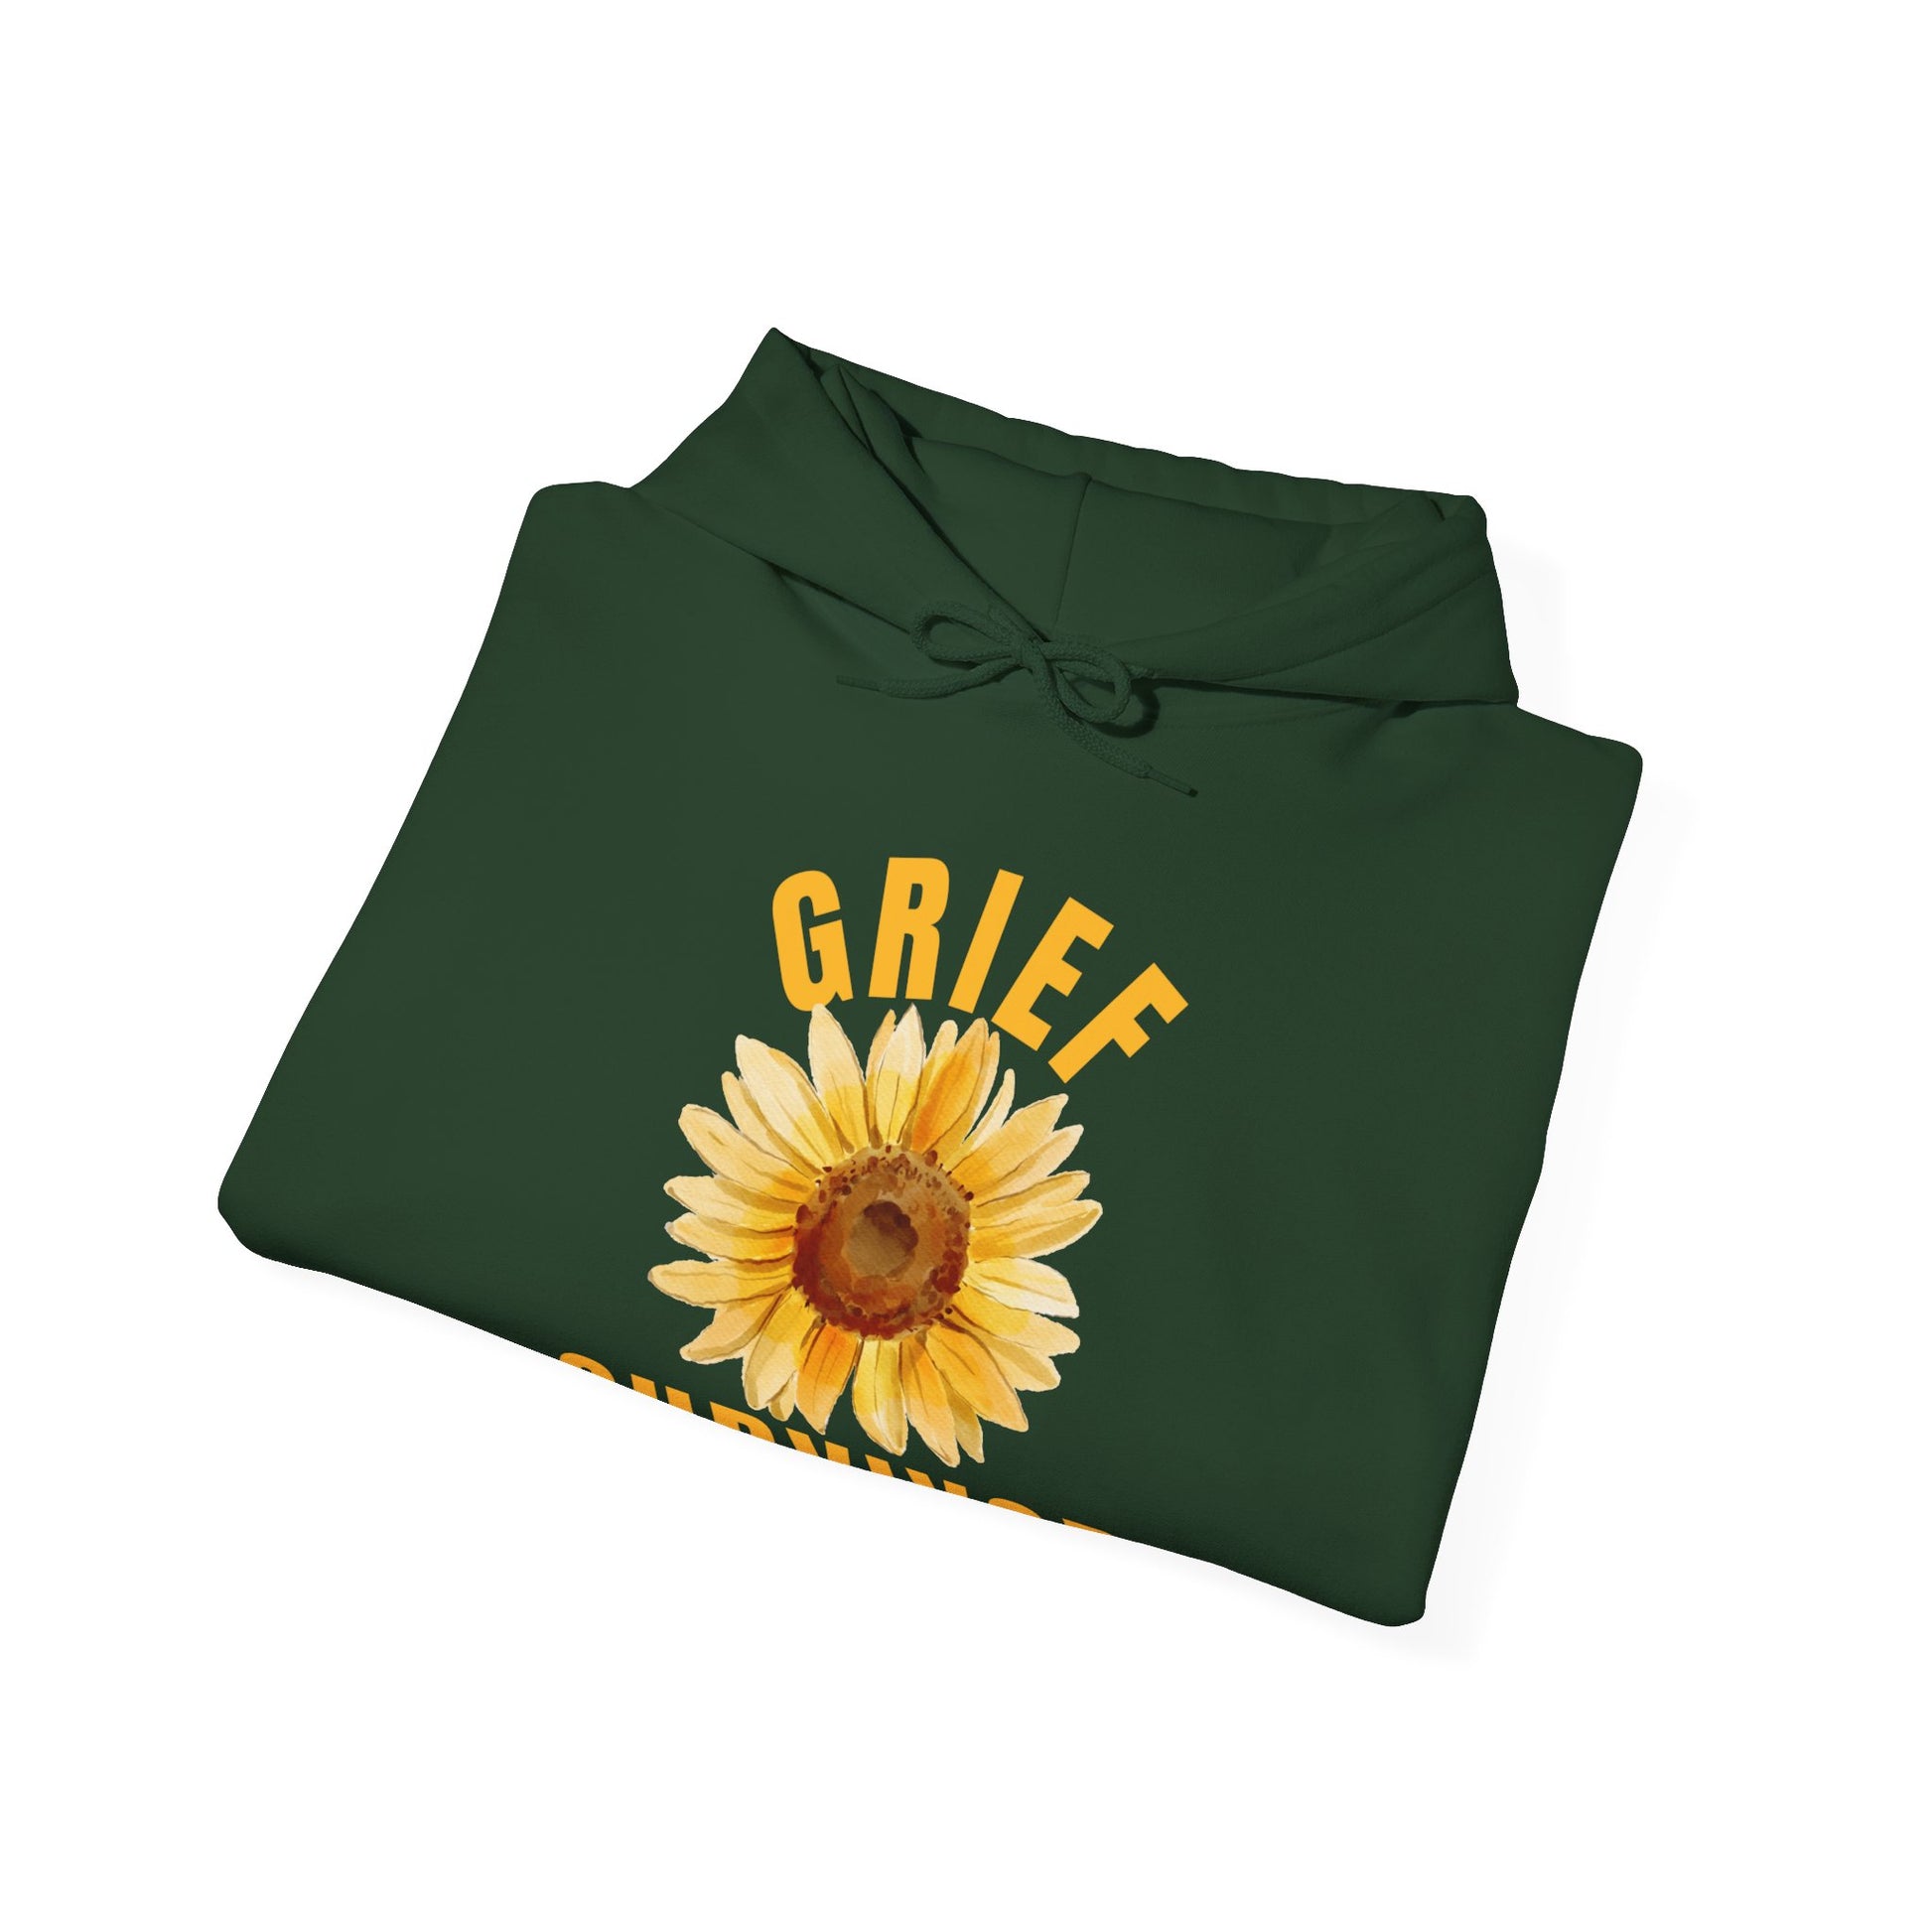 Grief Survivor Sunflower Gildan 18500 Hooded Sweatshirt in Forest Green. Find solace in this cozy hoodie to show strength during difficult times.